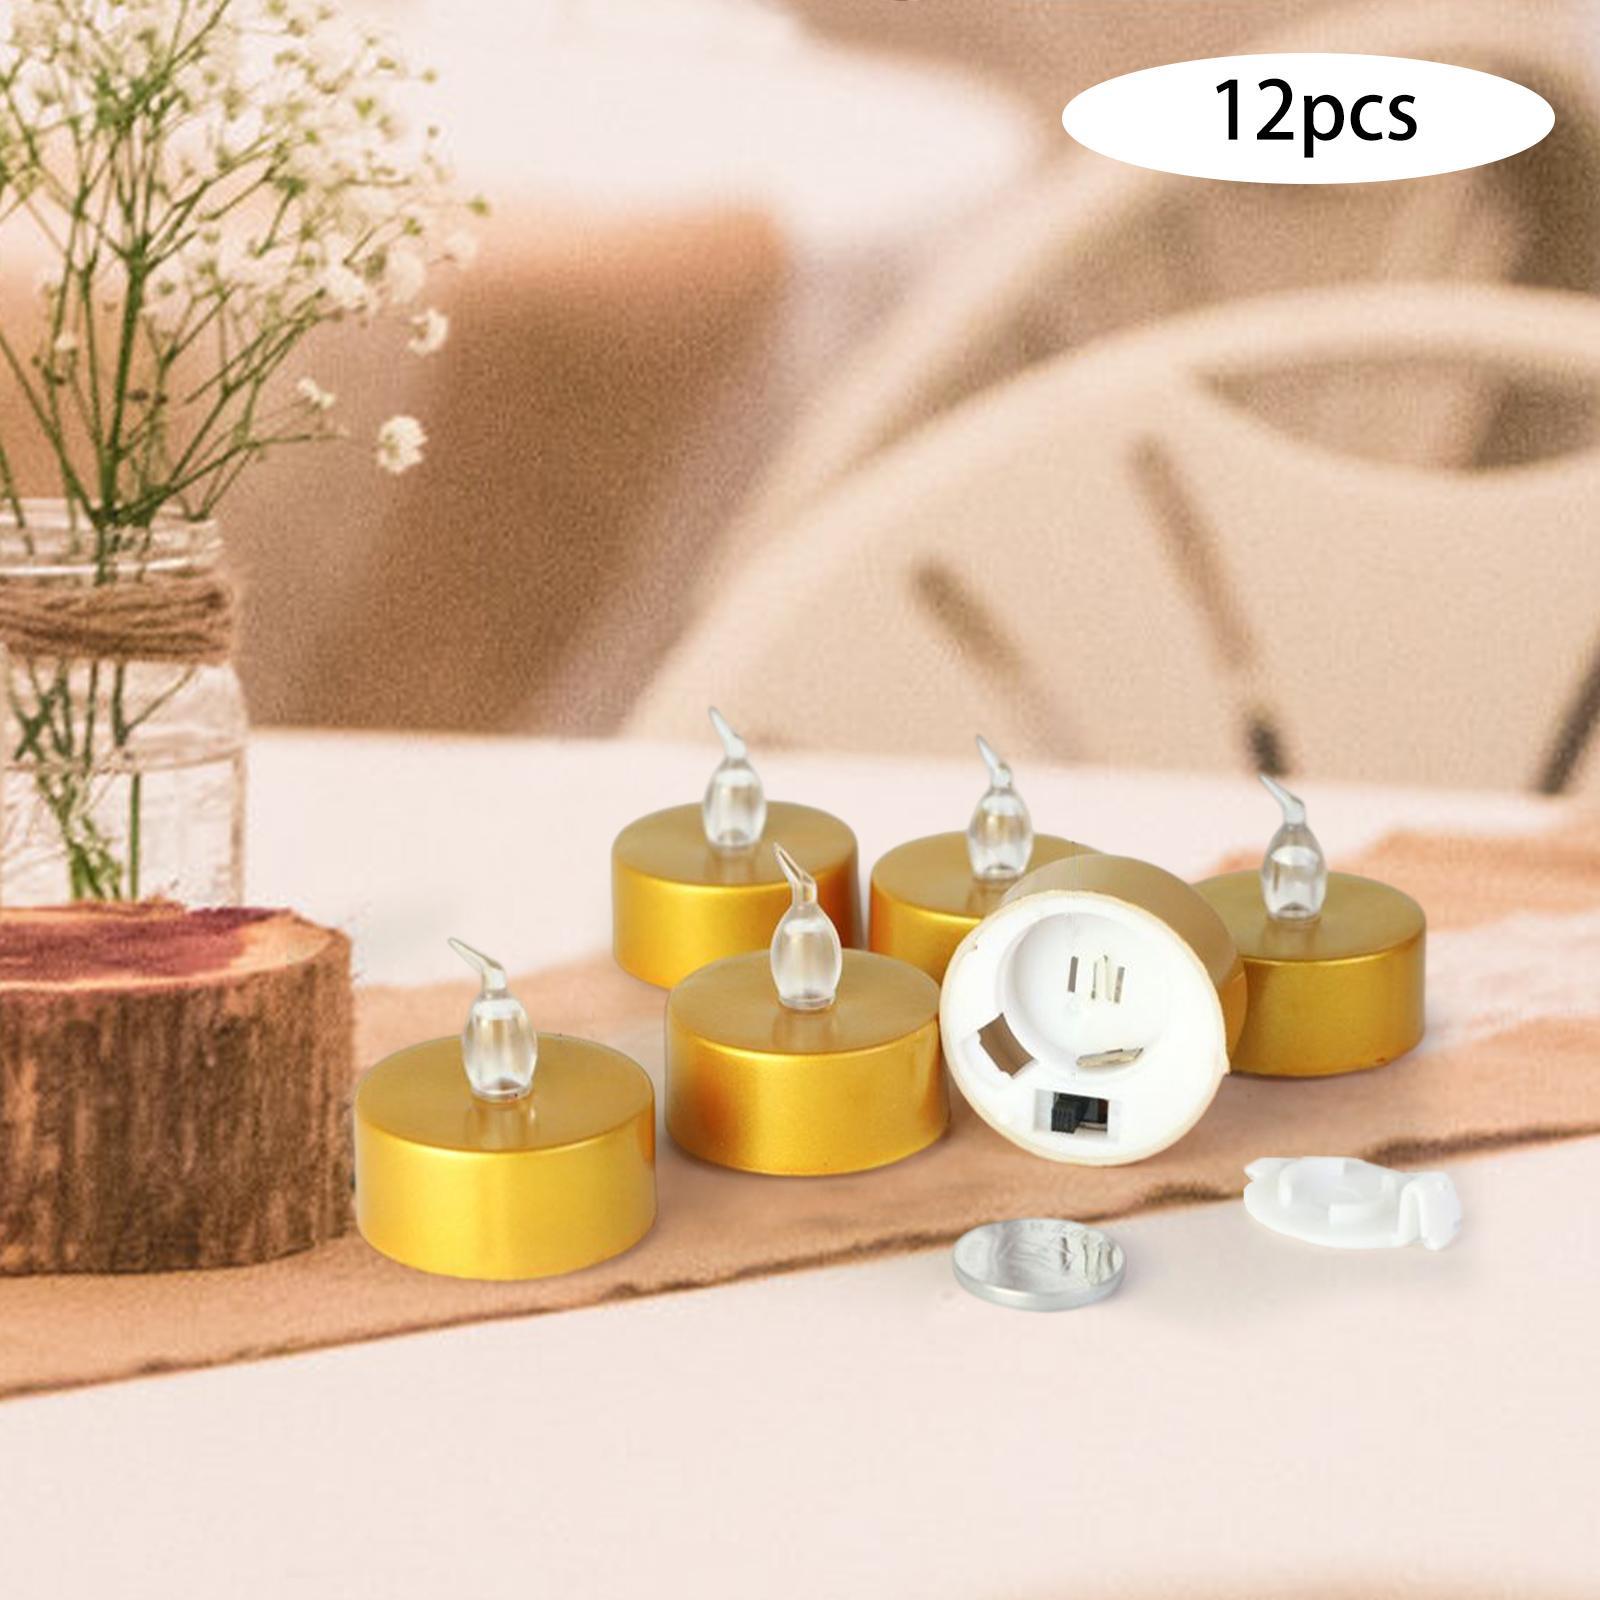 24x Small LED Tealights Candles